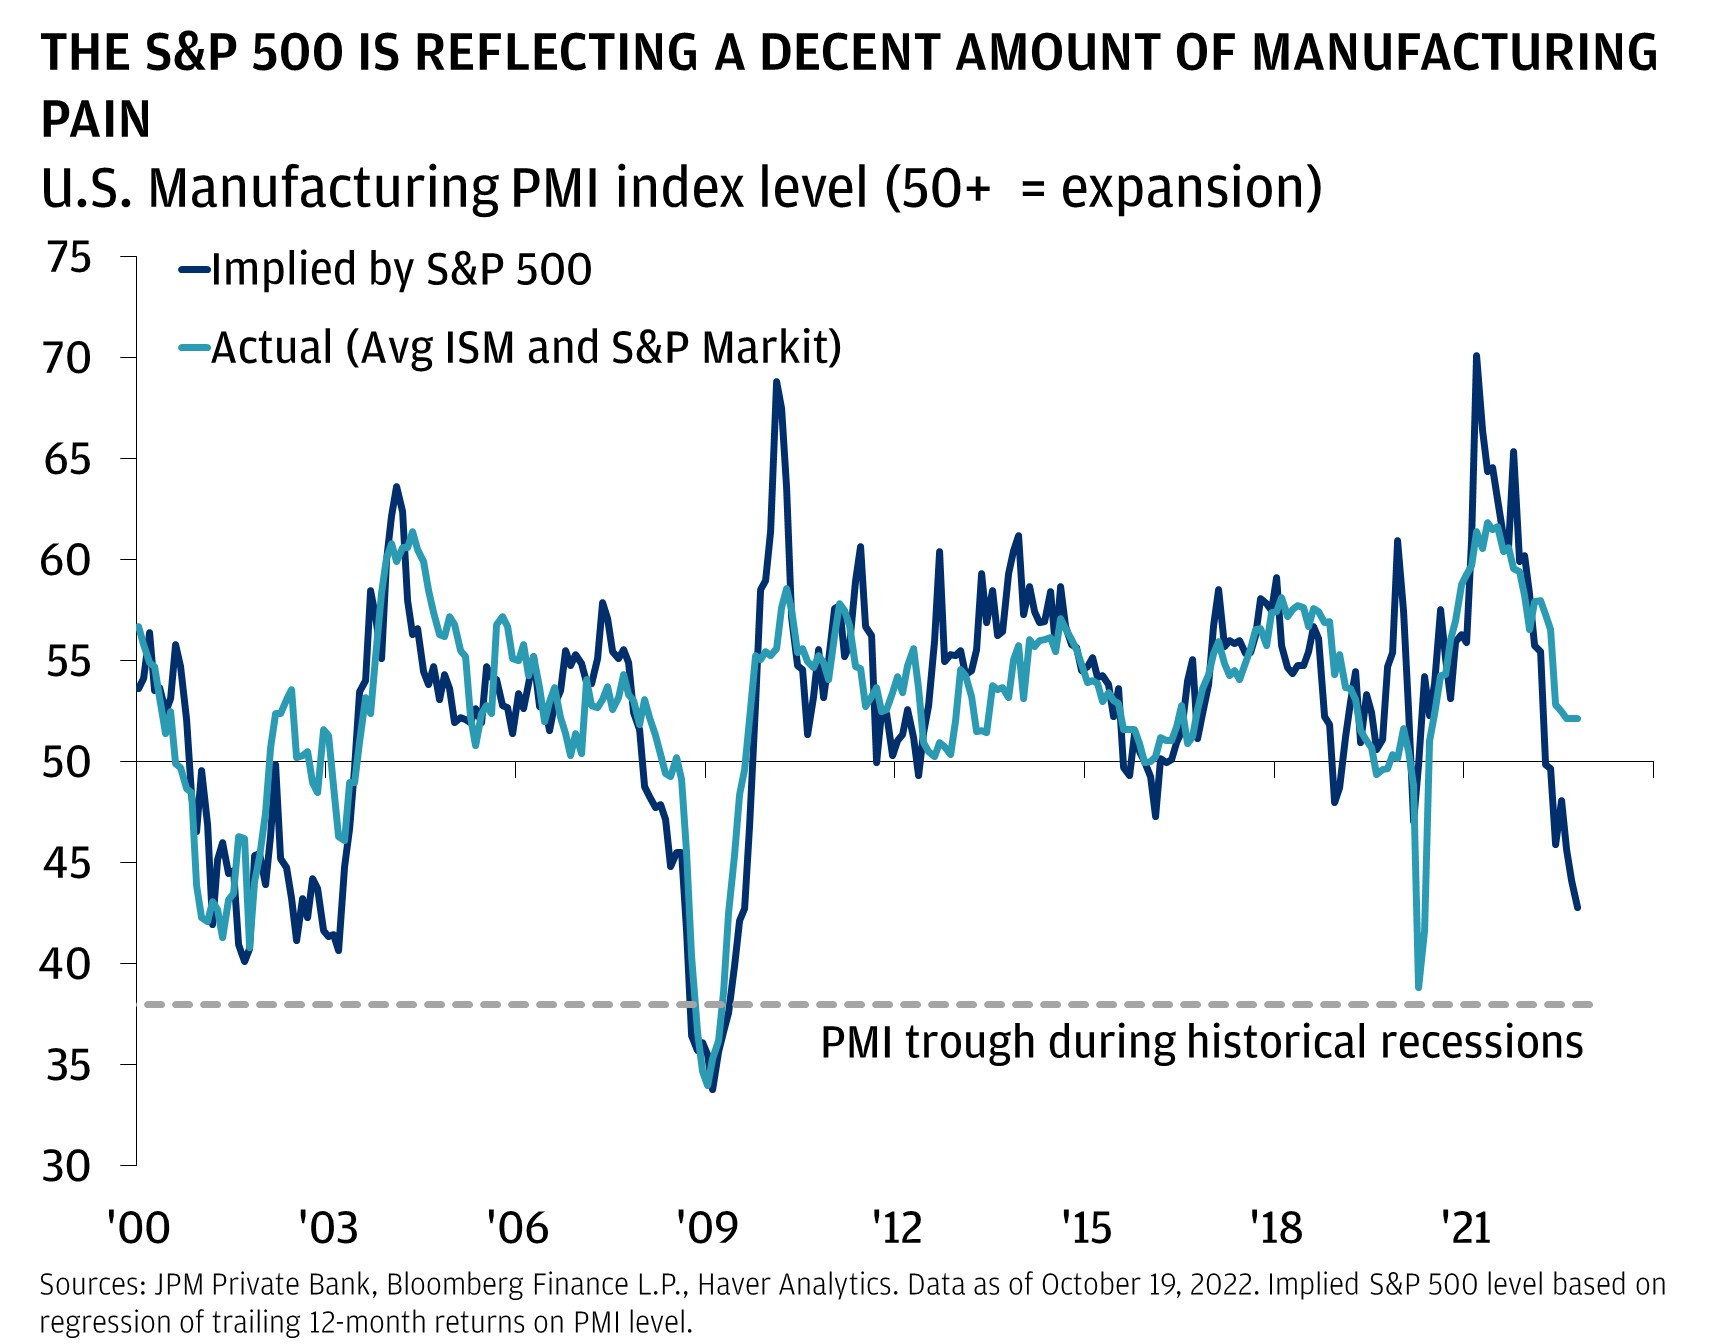 This charts shows the U.S. Manufacturing PMI index level implied by the S&P 500 (henceforth, implied PMI), versus the actual PMI index level as an average of the ISM and S&P Markit Manufacturing indices (henceforth, actual PMI).